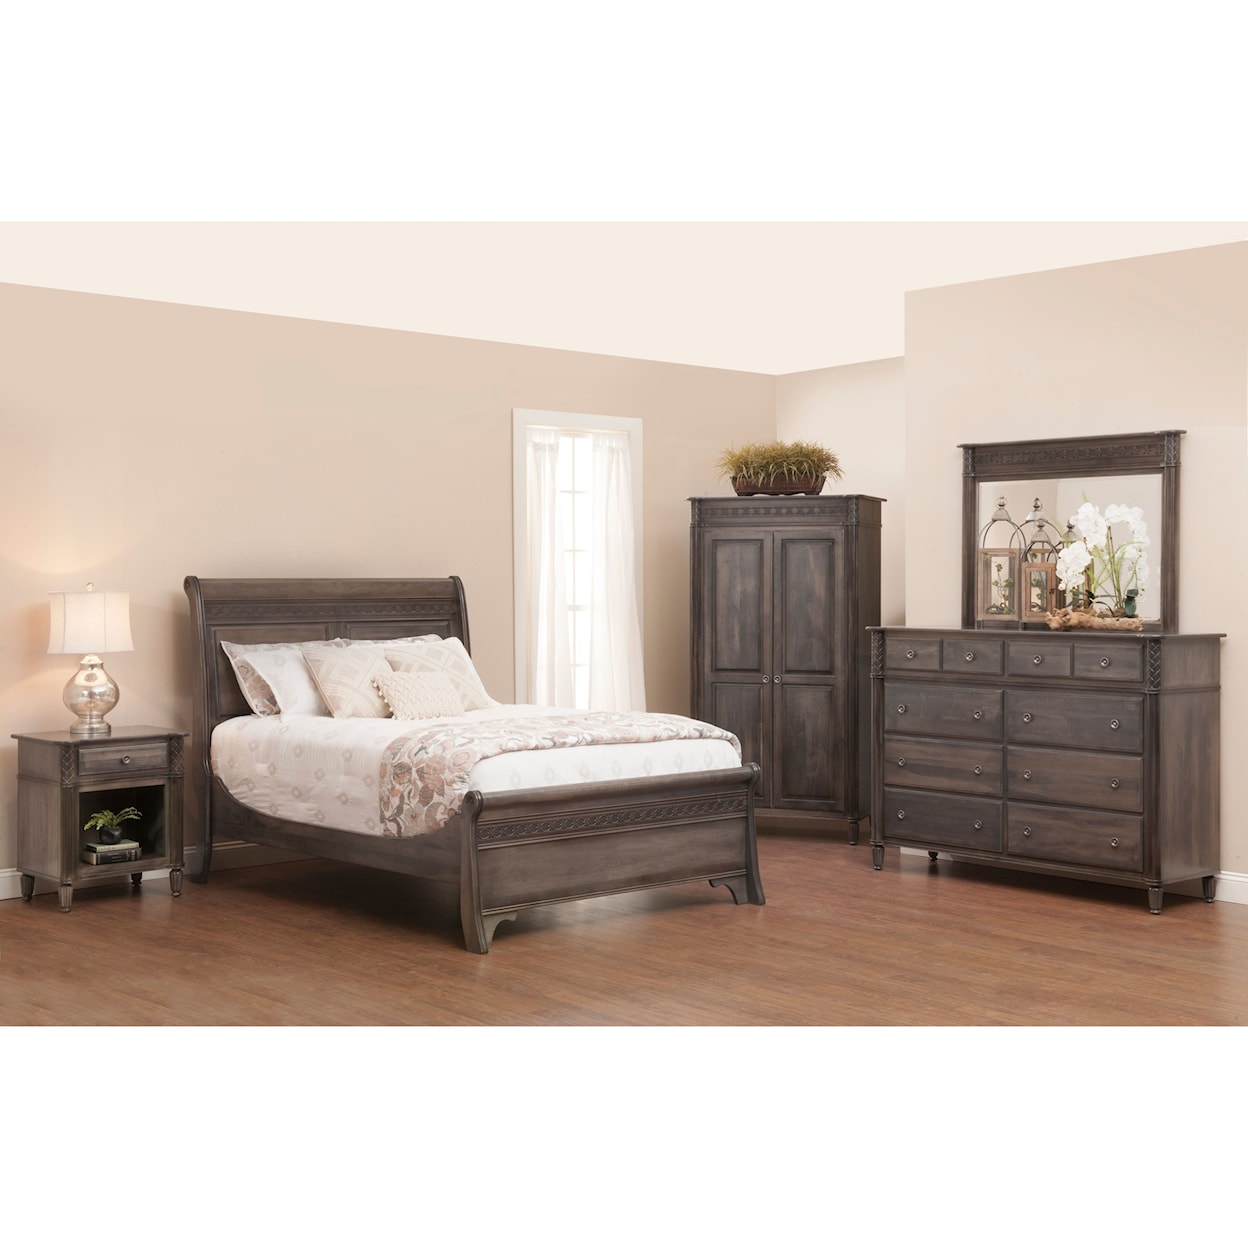 Millcraft Eminence King Sleigh Bed with Short Footboard